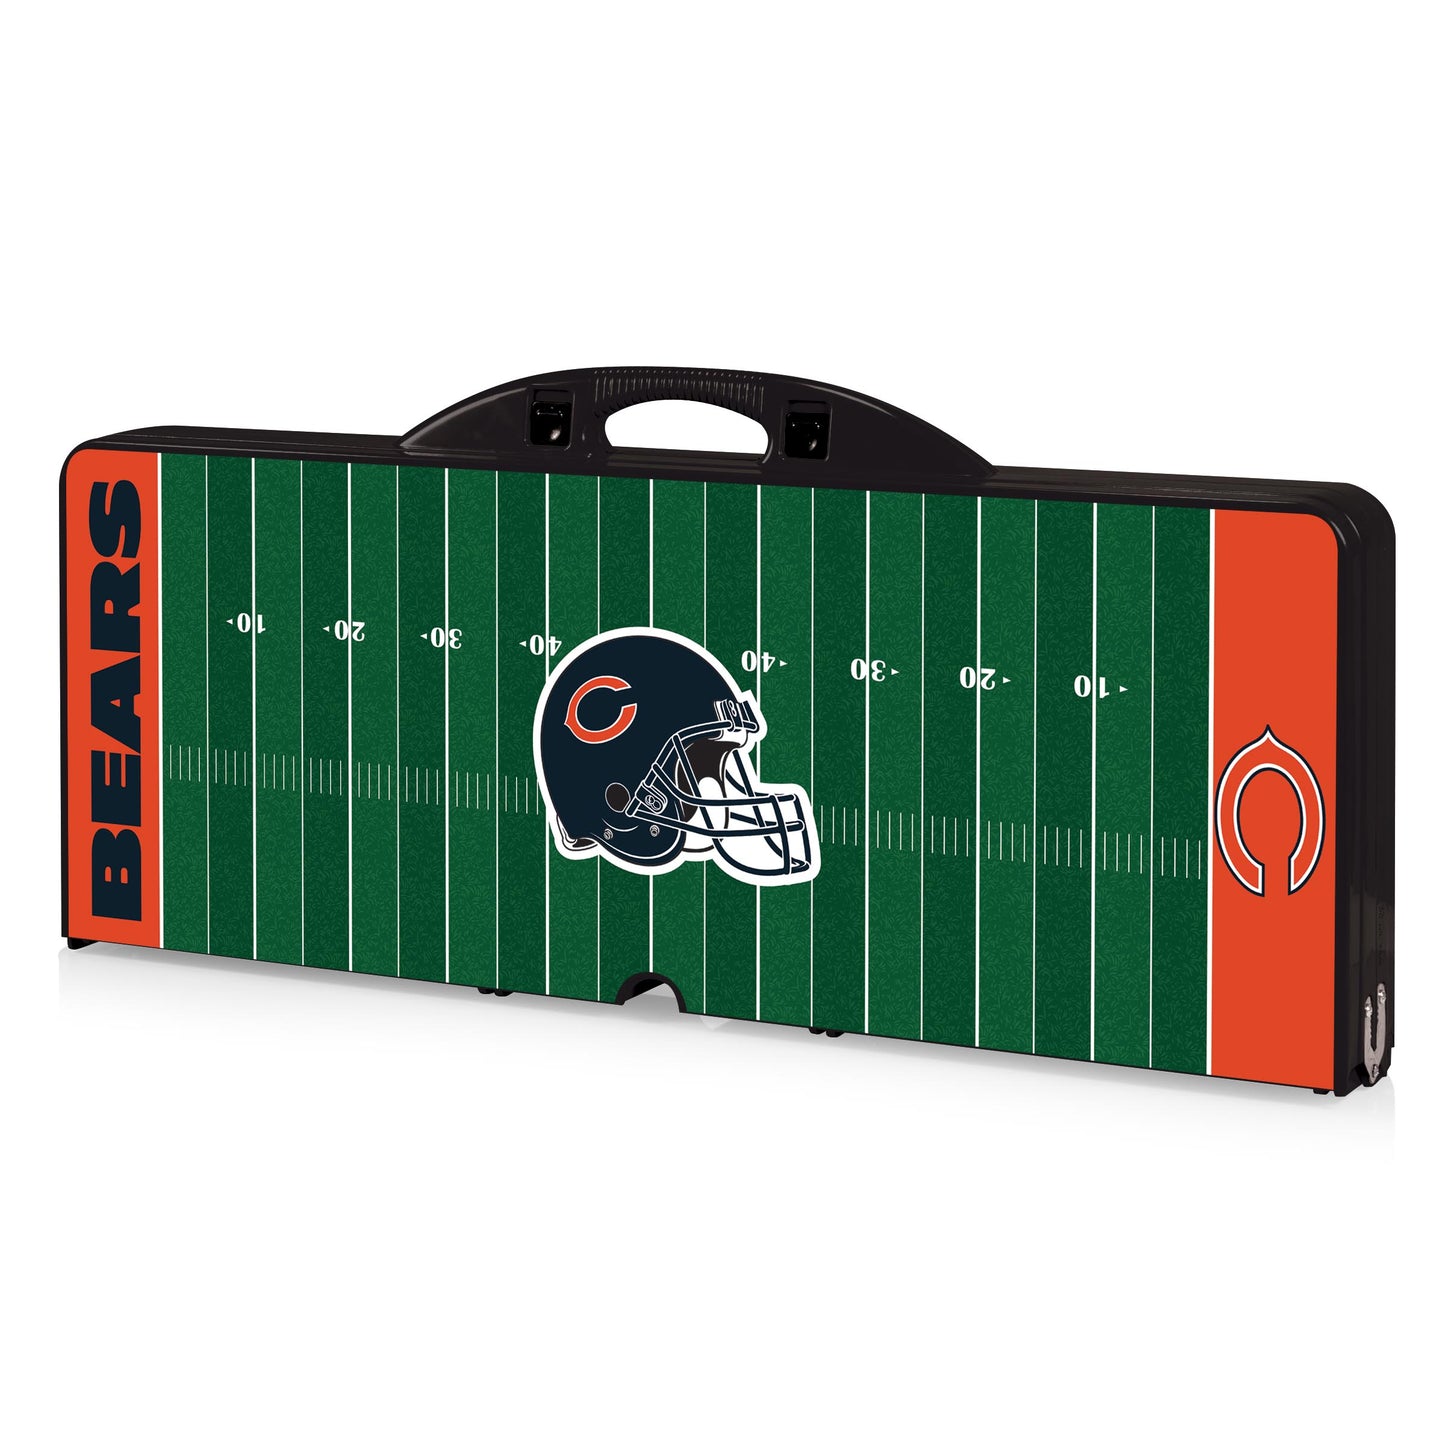 Chicago Bears - Picnic Table Portable Folding Table with Seats and Umbrella